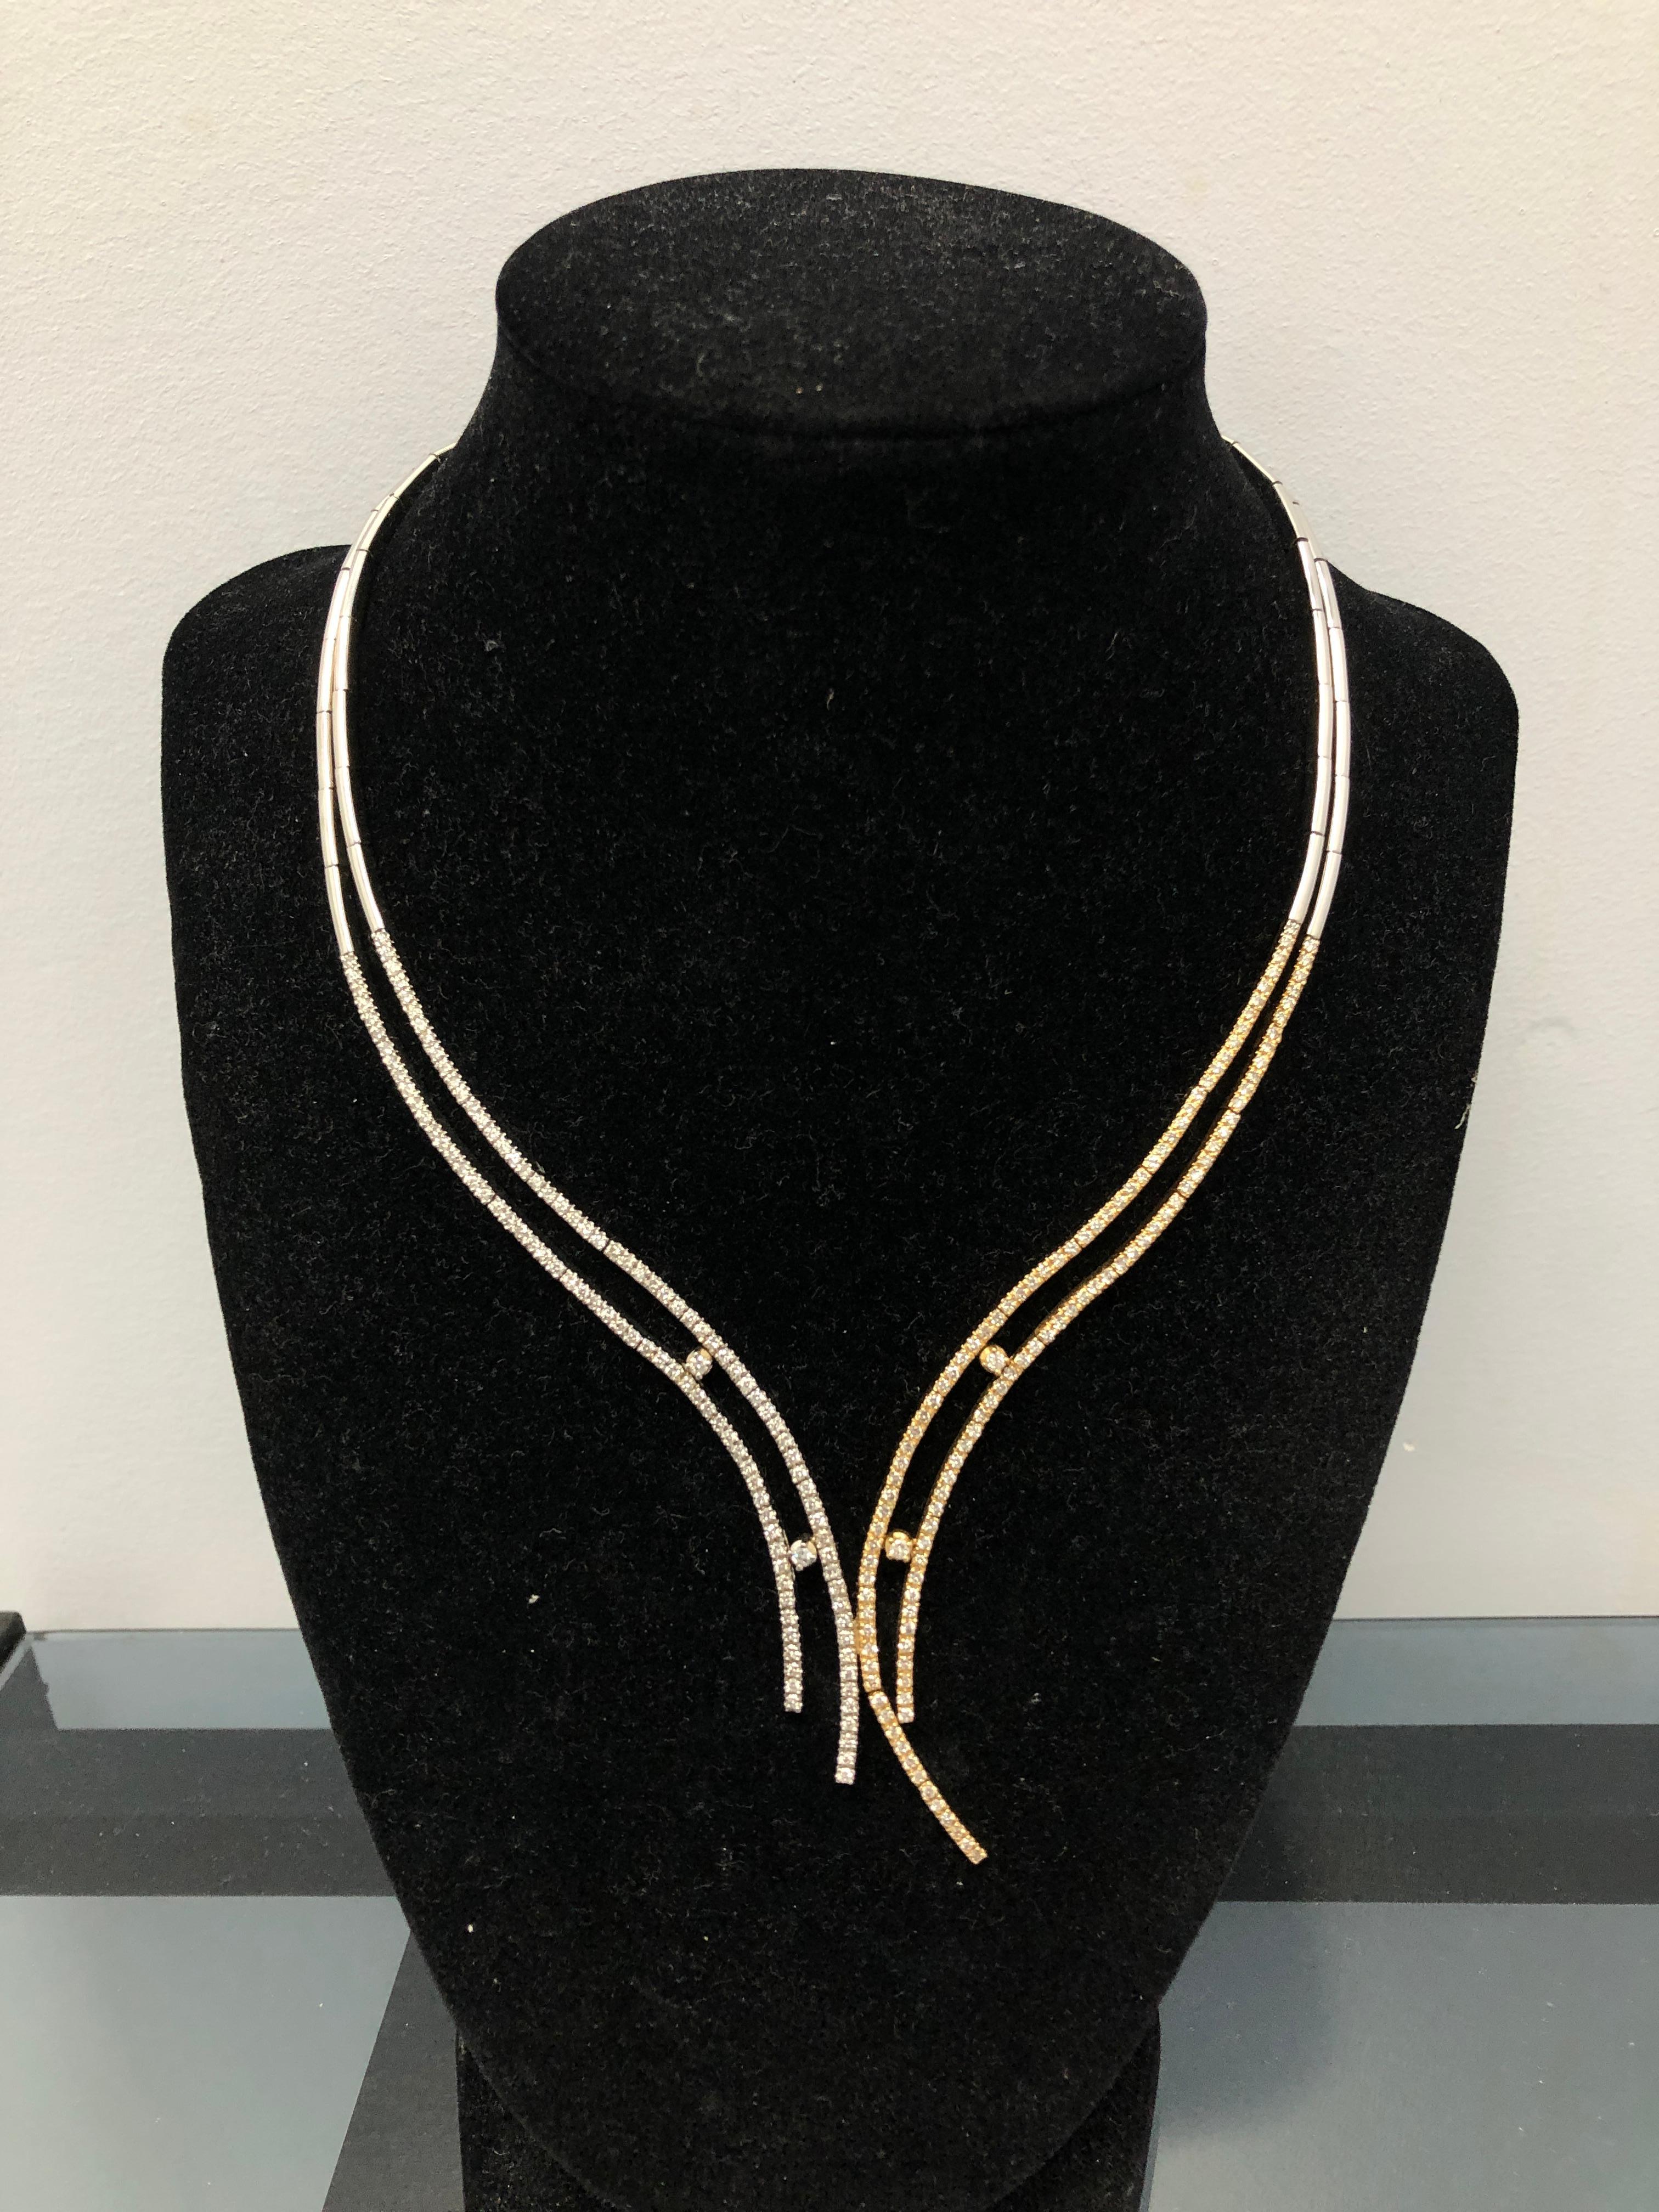 A 14K two tone gold necklace containing 220 round brilliant-cut diamonds weighing approximately 2.25 carats total.

Stone: Diamond

Metal: 14K Yellow & White Gold

Size: 15